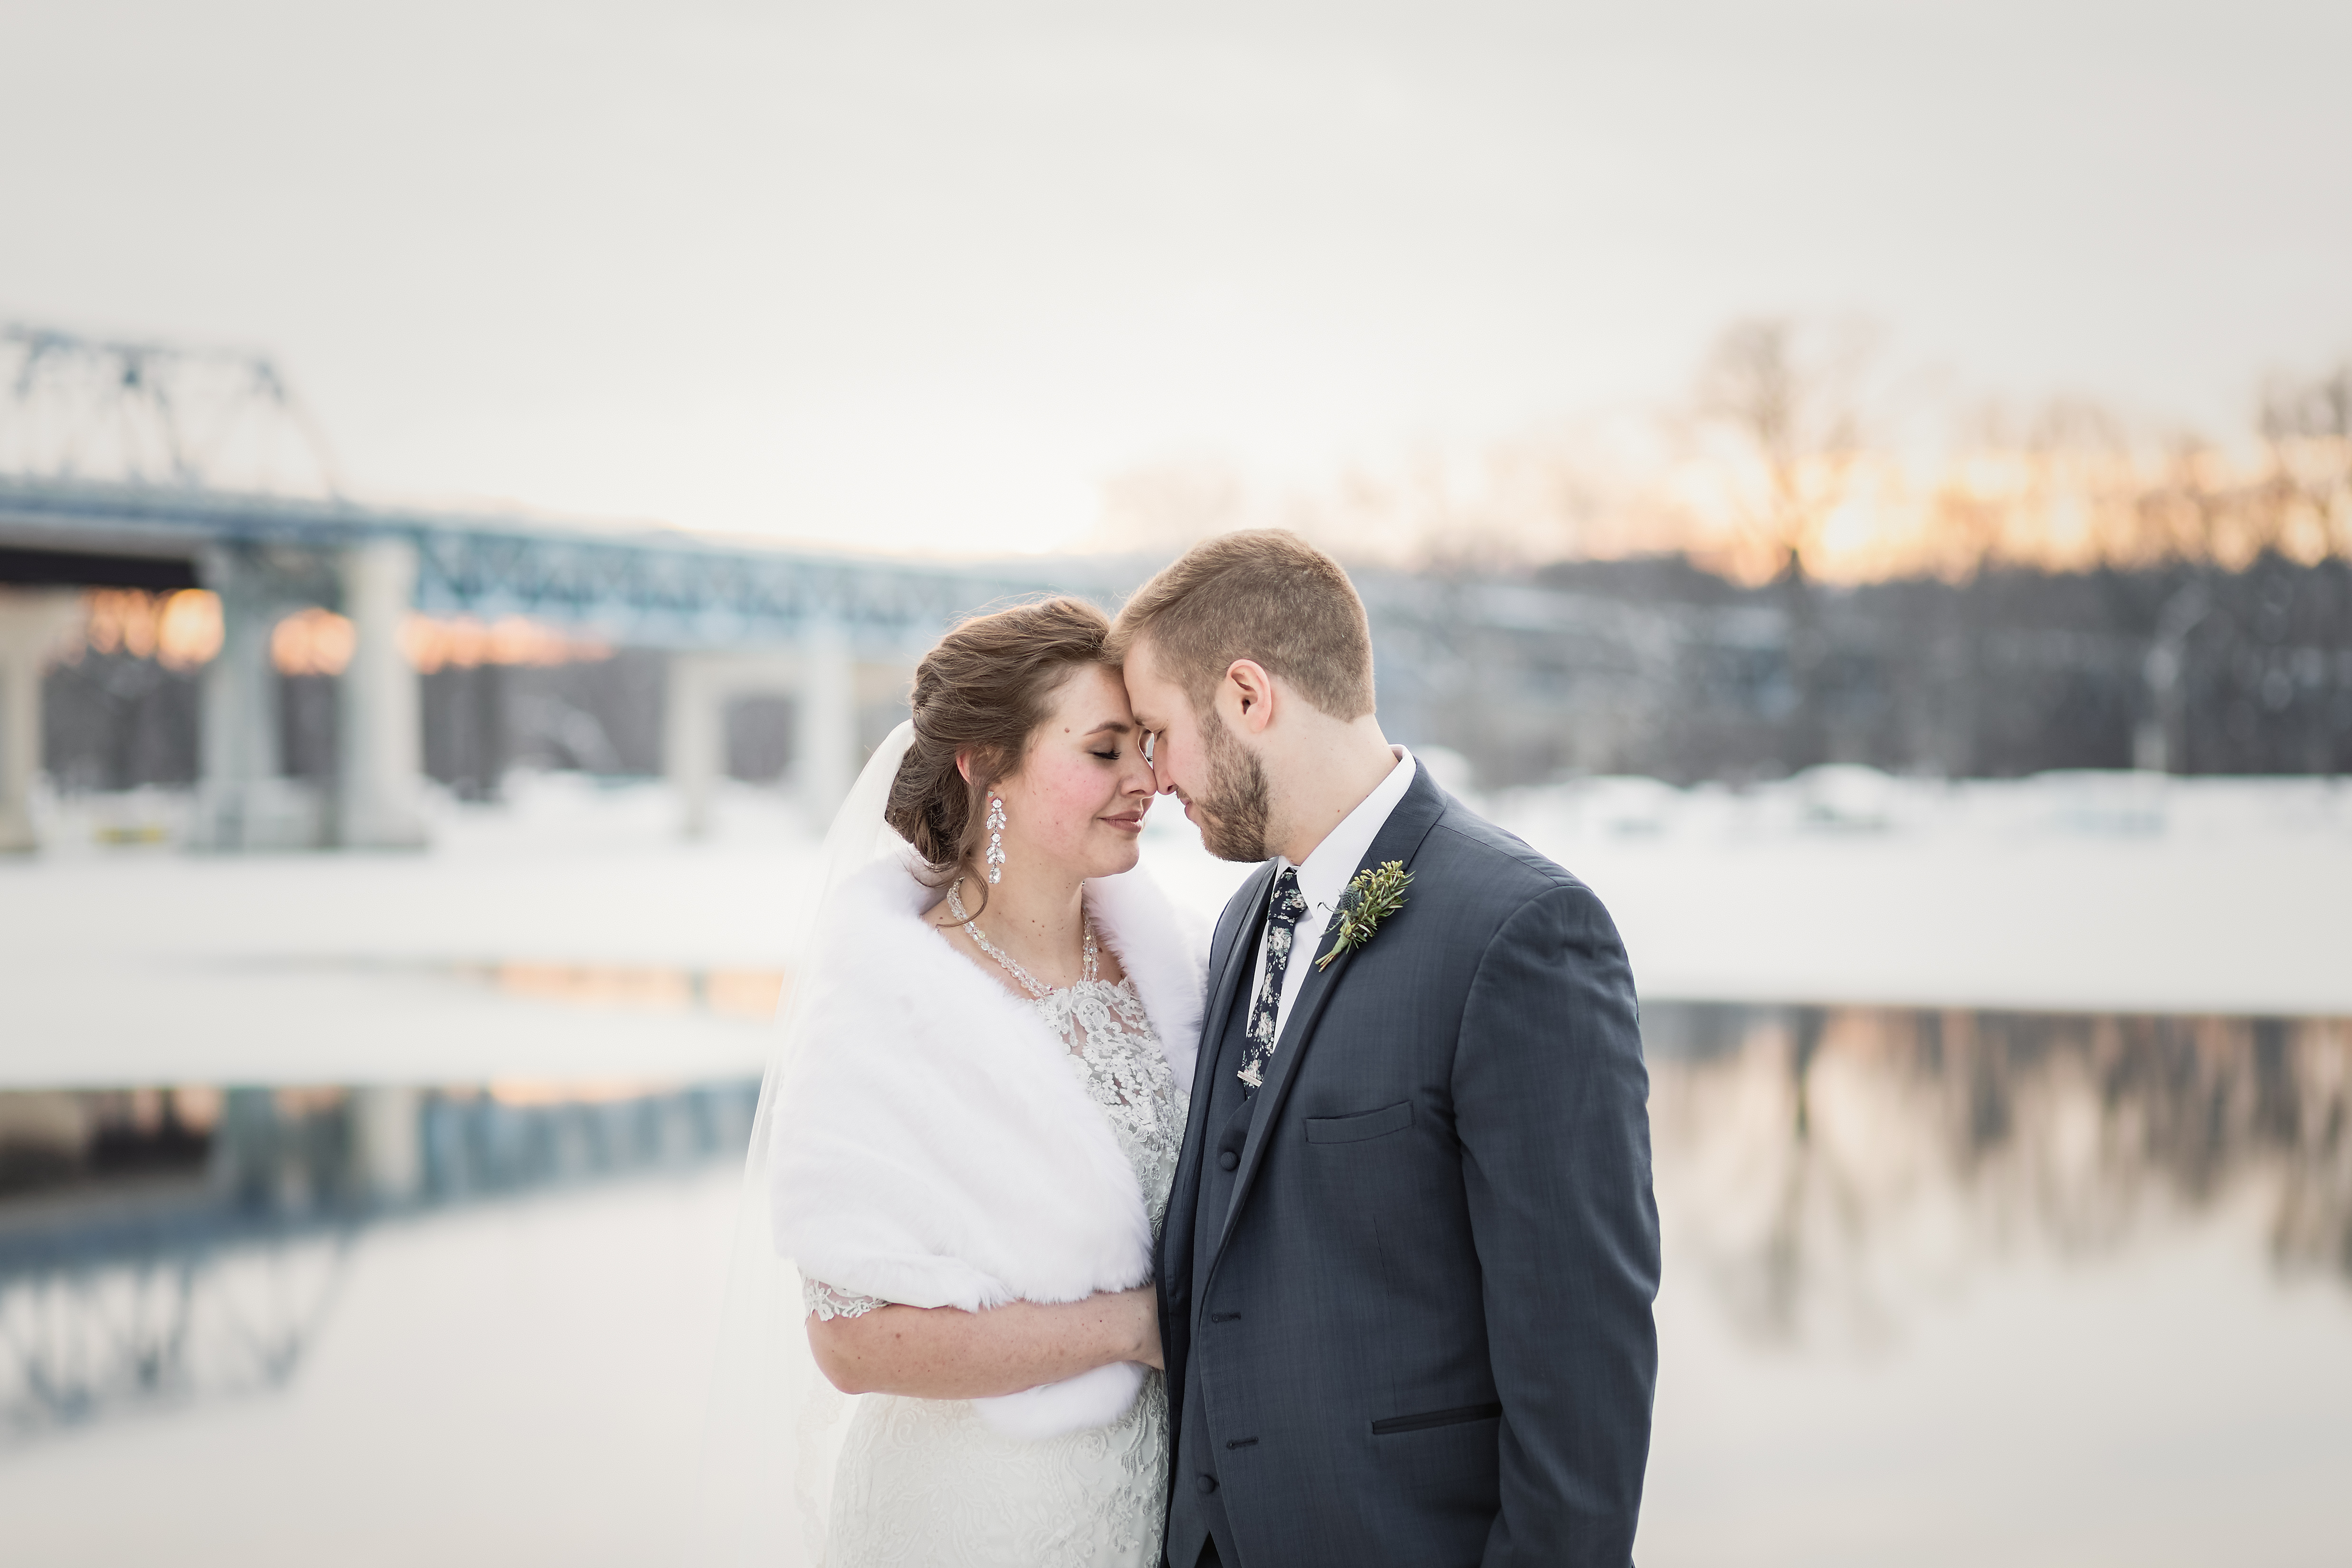 Romantic Pink and Navy Winter Wedding at The Cargill Room in The Waterfront Restaurant La Crosse, WI | © Pink Spruce Photography | www.pinksprucephotography.com